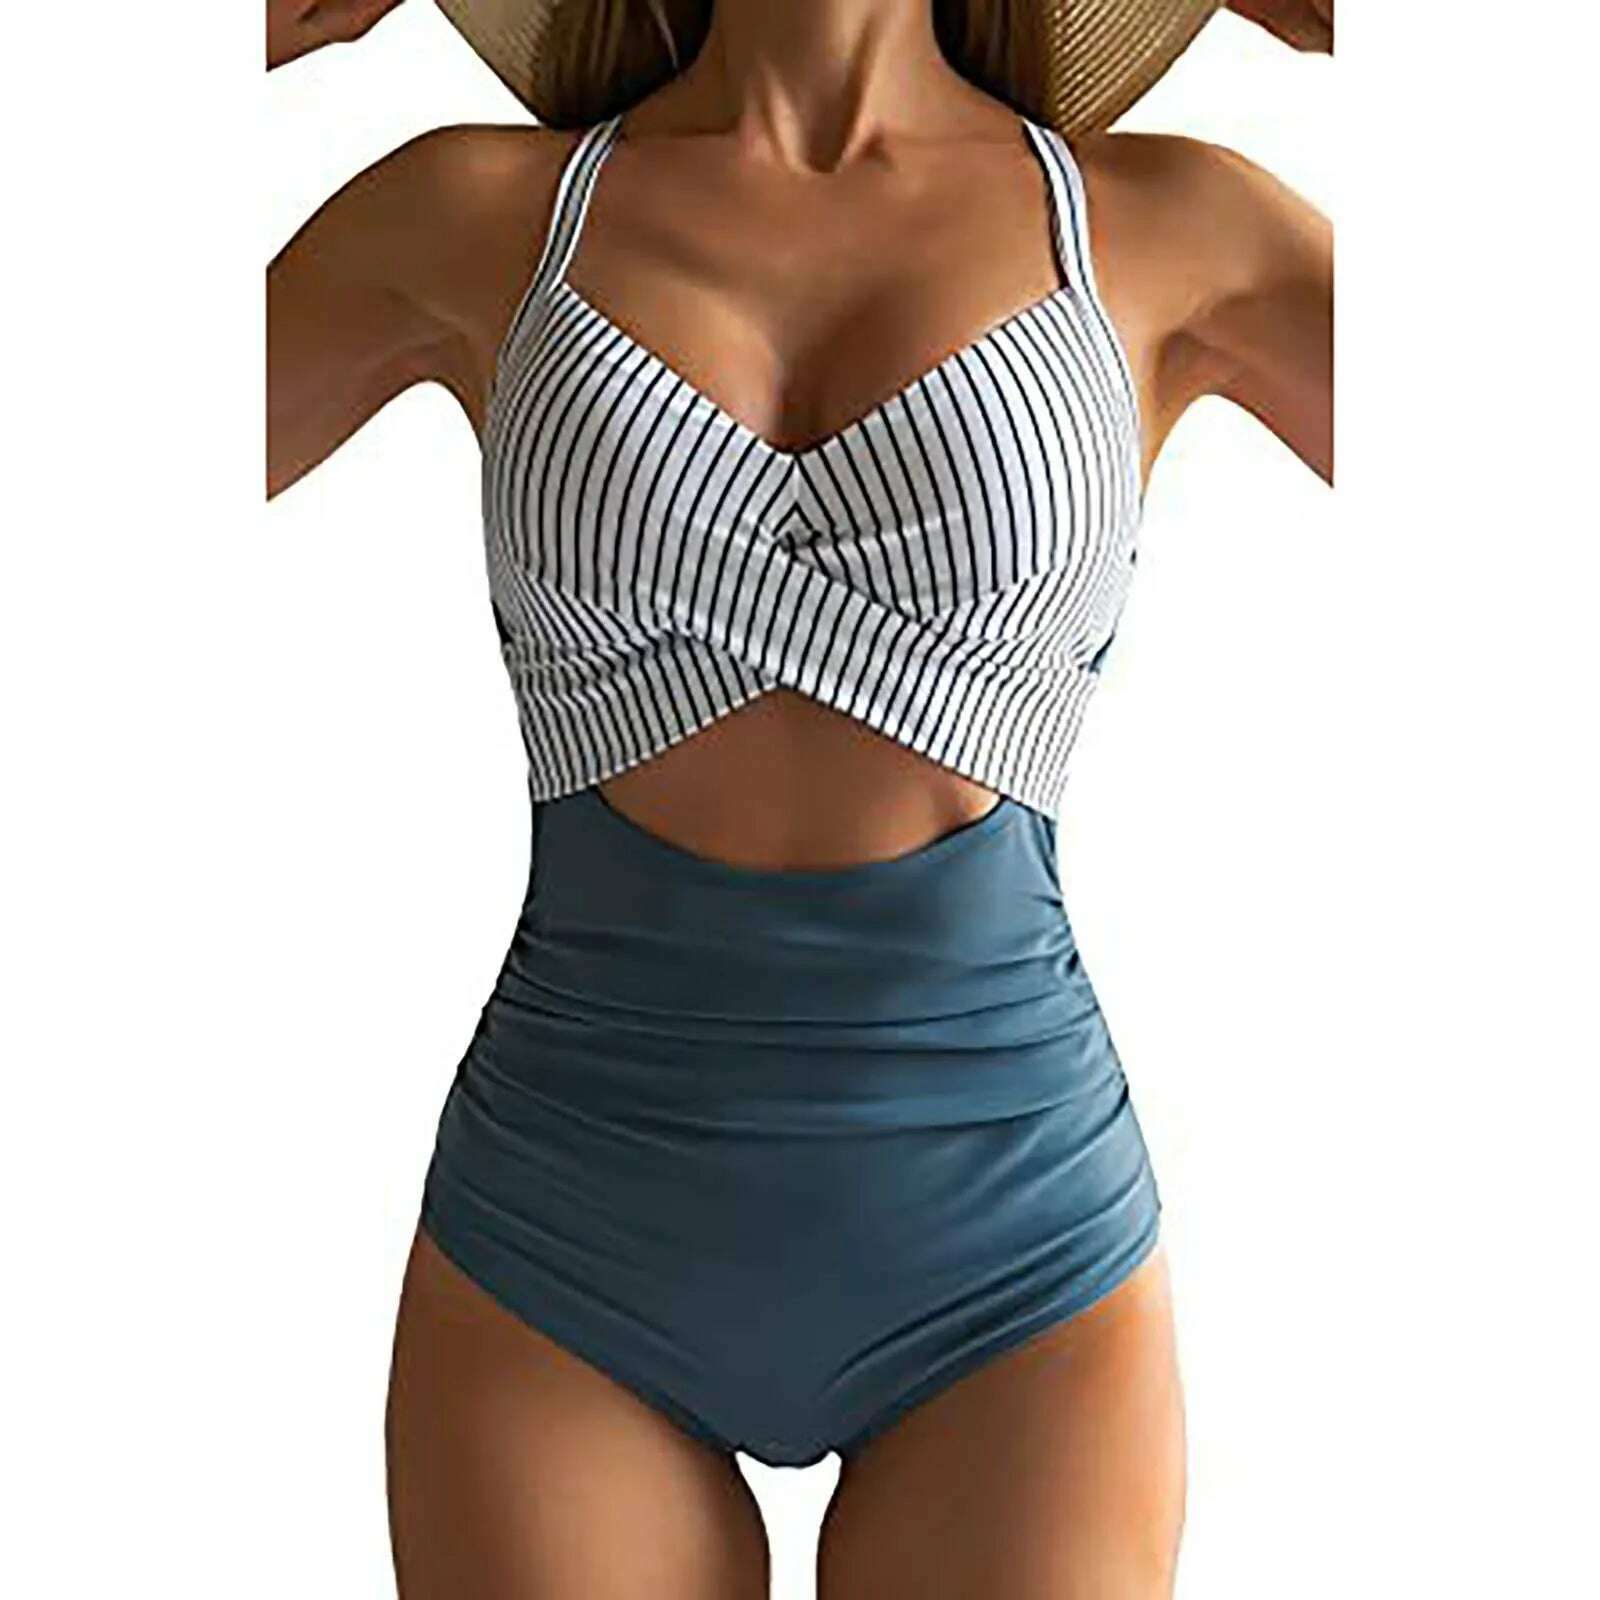 KIMLUD, Women's Colorful Sexy Hollow Cross Halter Bikini Beach Swimsuit (With Chest Pad Without Steel Bra), Blue / S, KIMLUD Women's Clothes